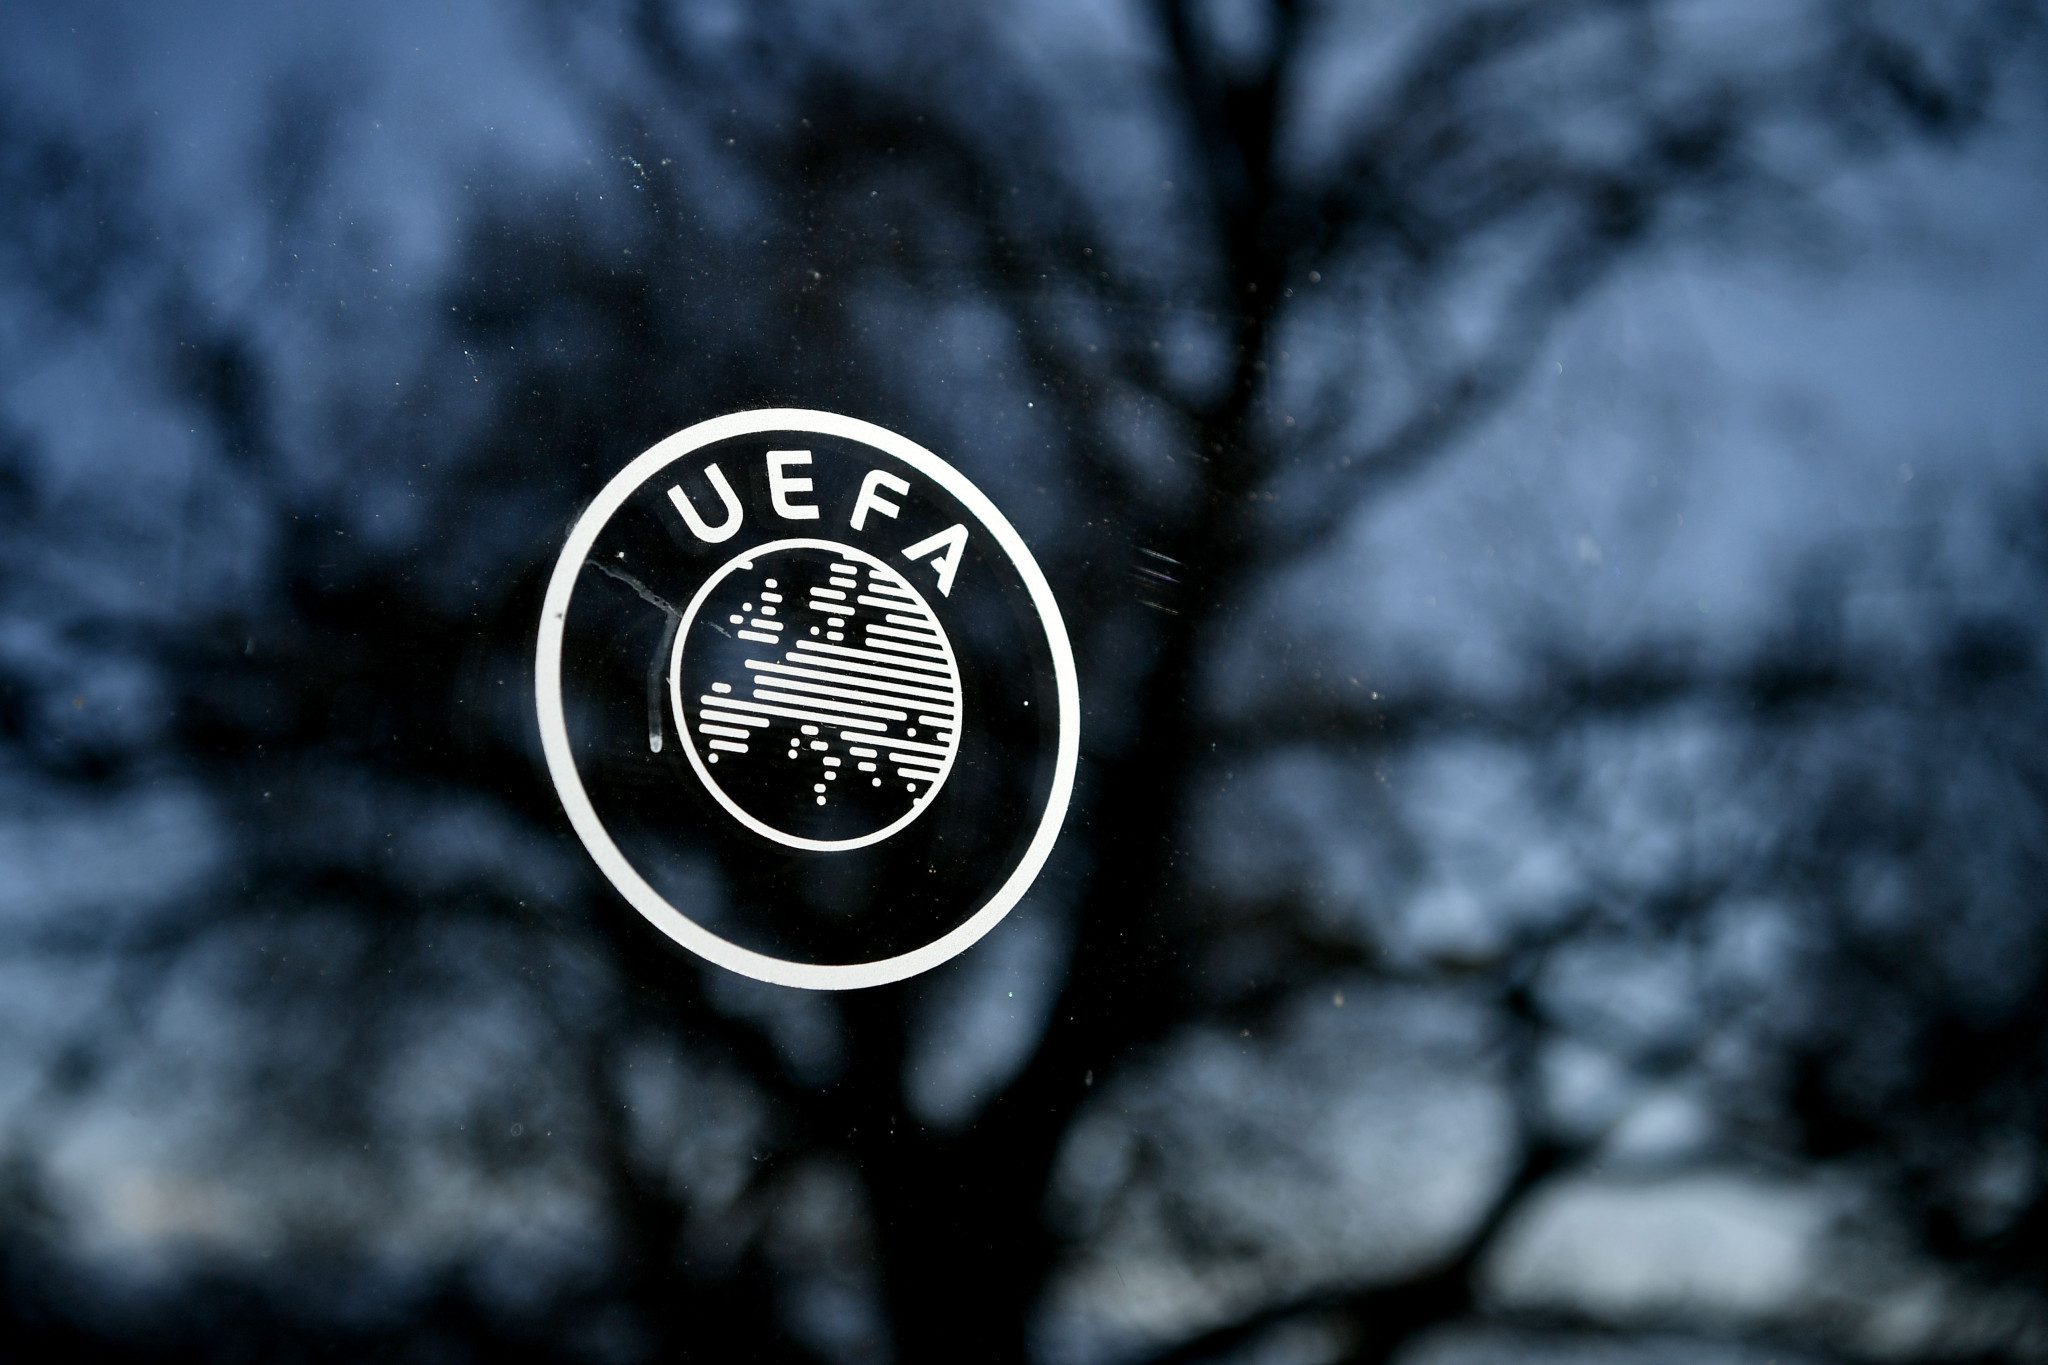 UEFA abandons plan to reinstate Russian youth teams as "no solution" can be found